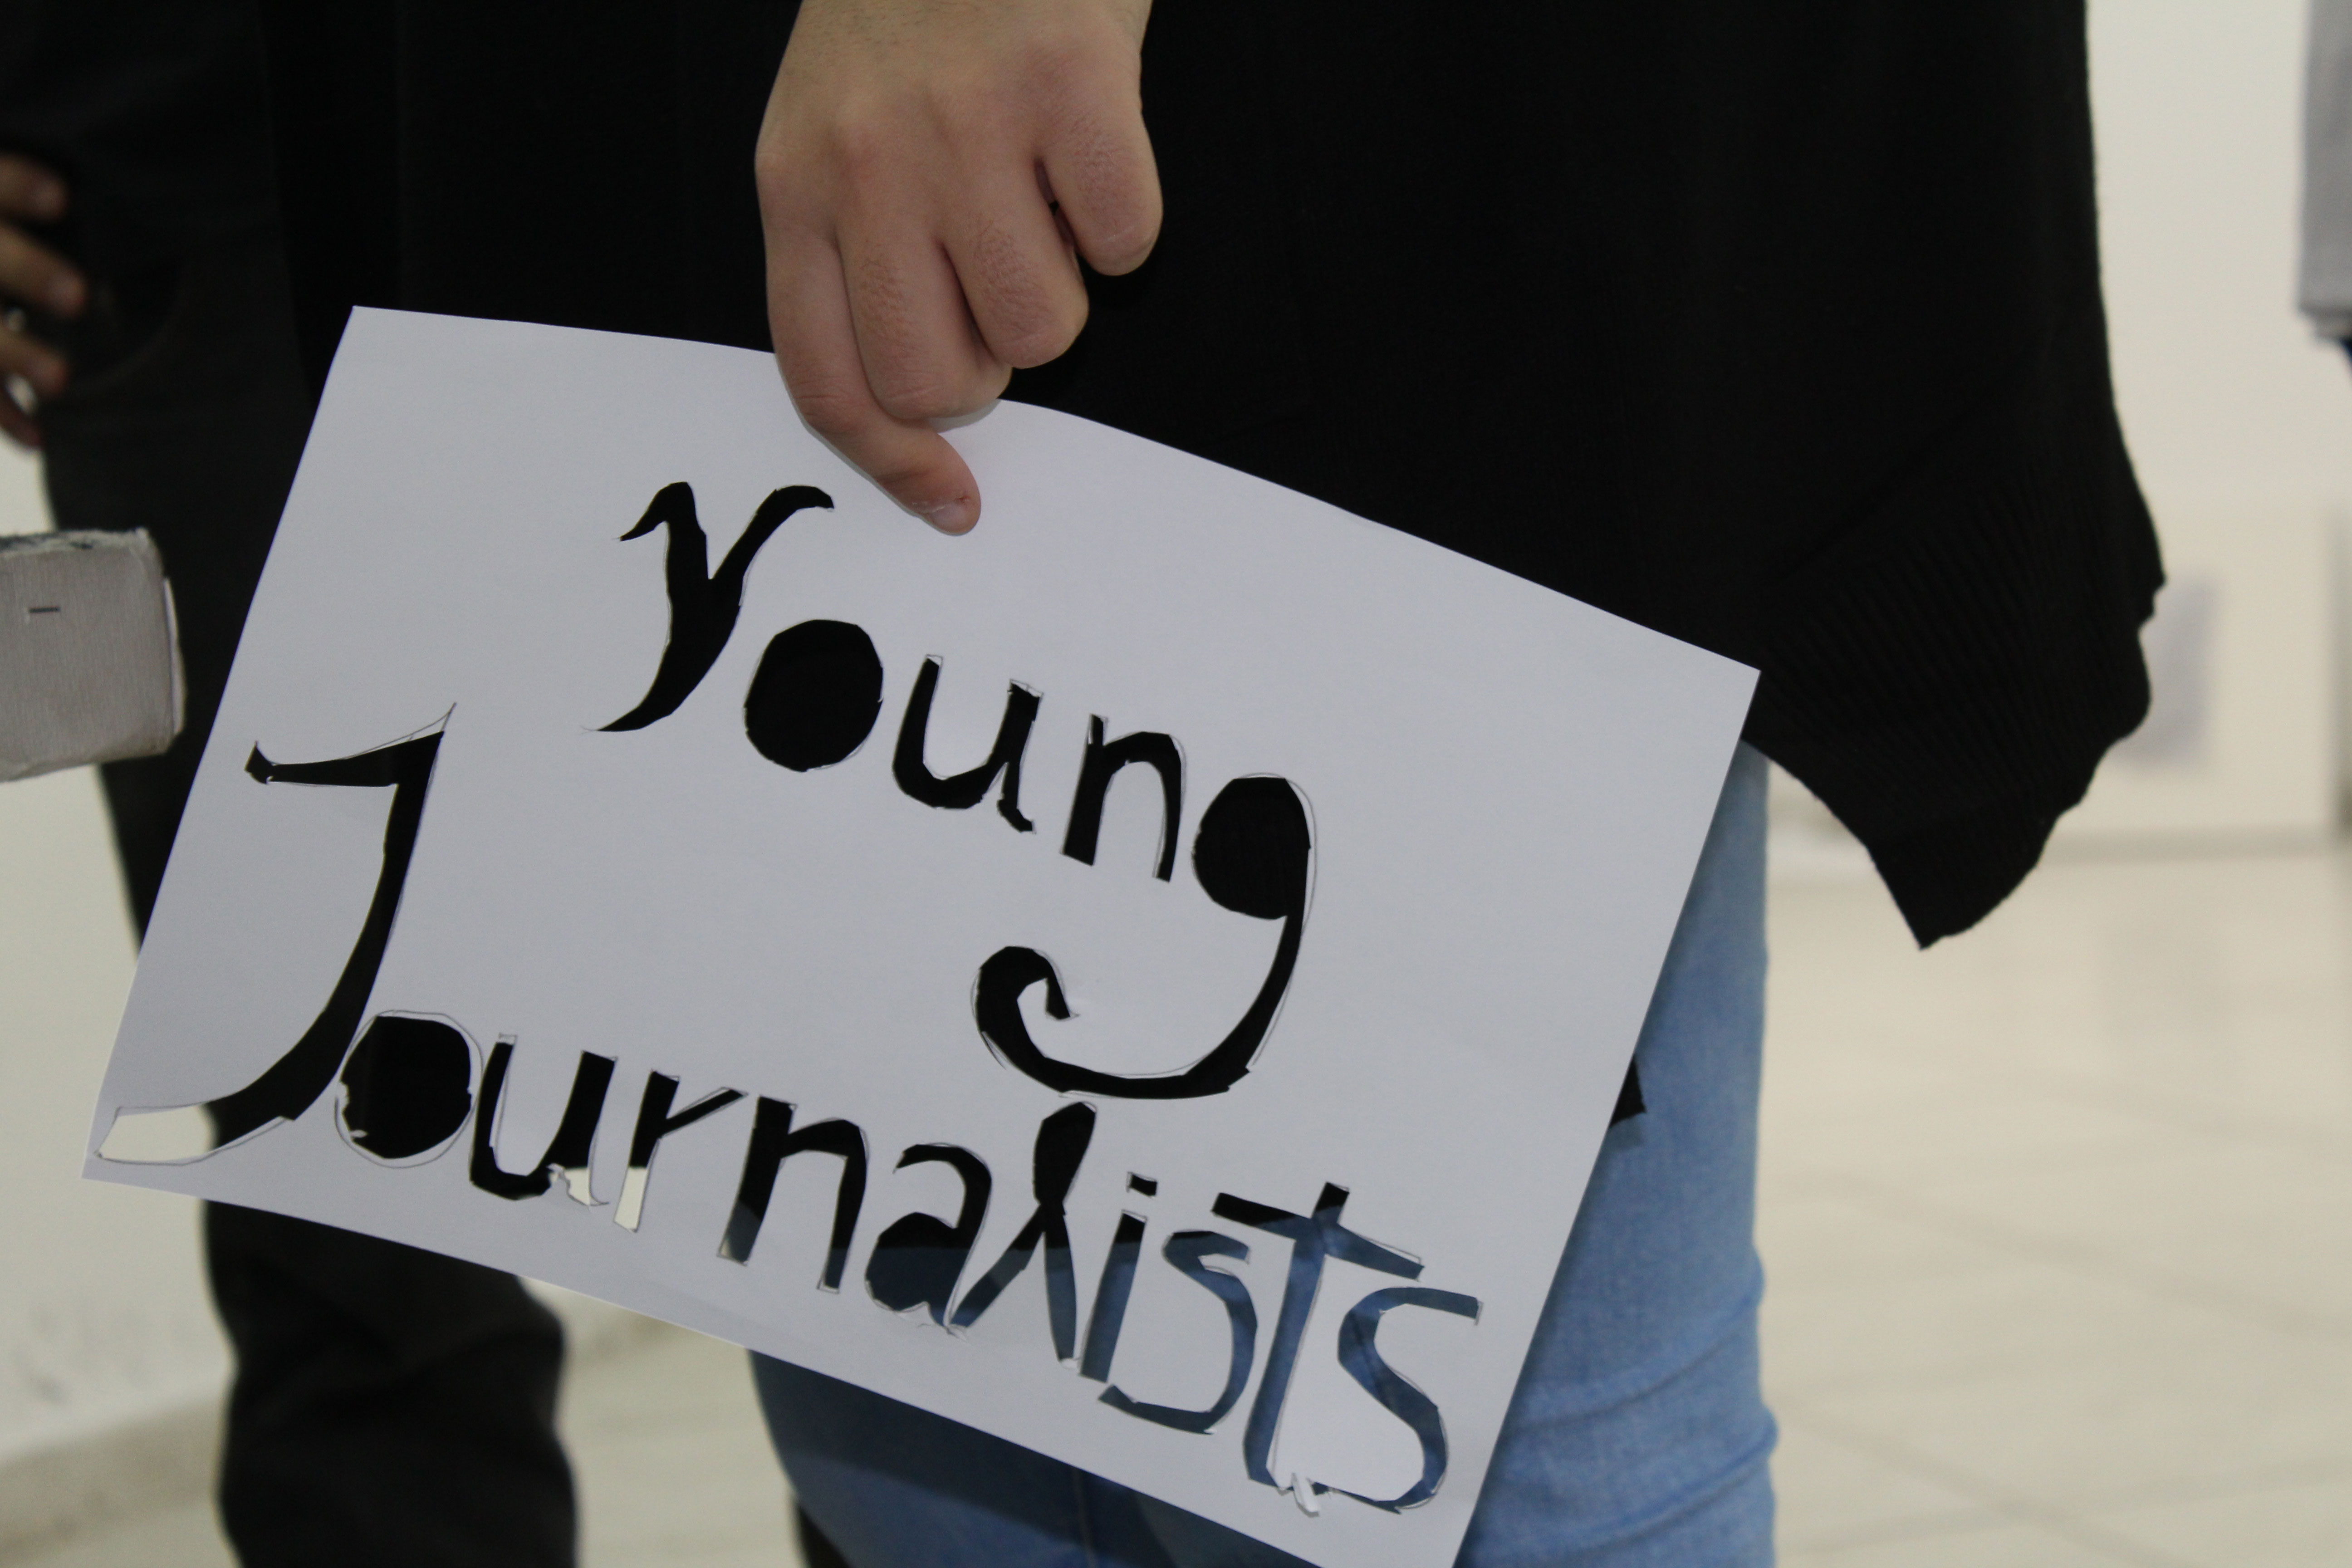 THE YOUNG JOURNALISTS